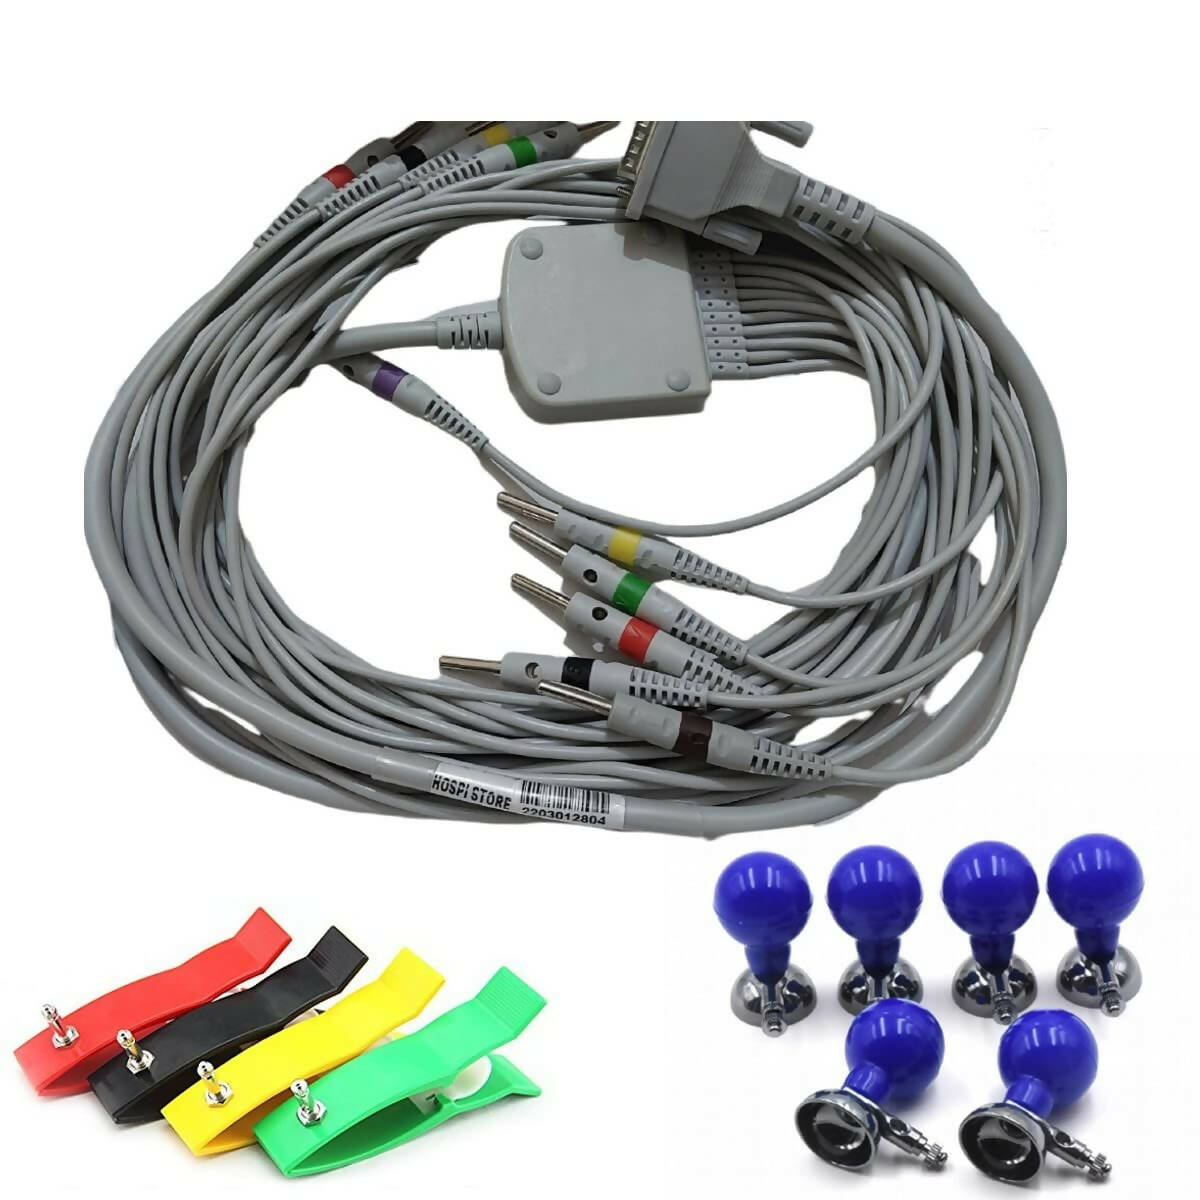 ECG Accessories Kit Combo | 10 Lead 15 Pin Banana Connector ECG Cable | Set of Clamp Electrodes | Set of Chest Electrodes with Bulbs